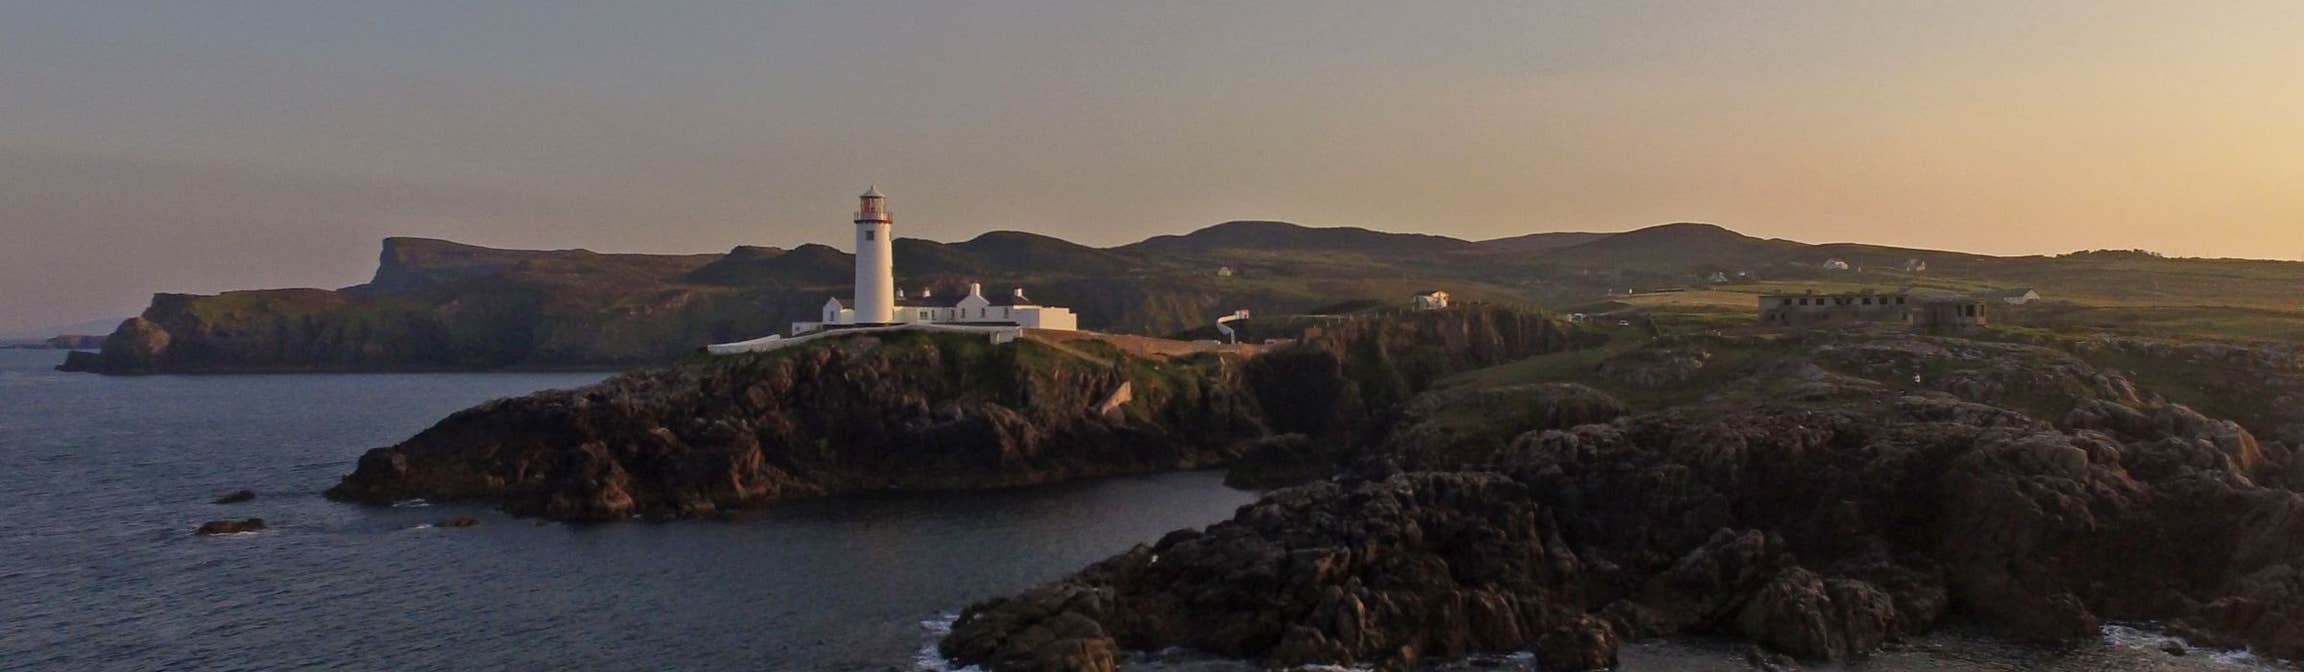 Fanad Lighthouse in County Donegal at sunset